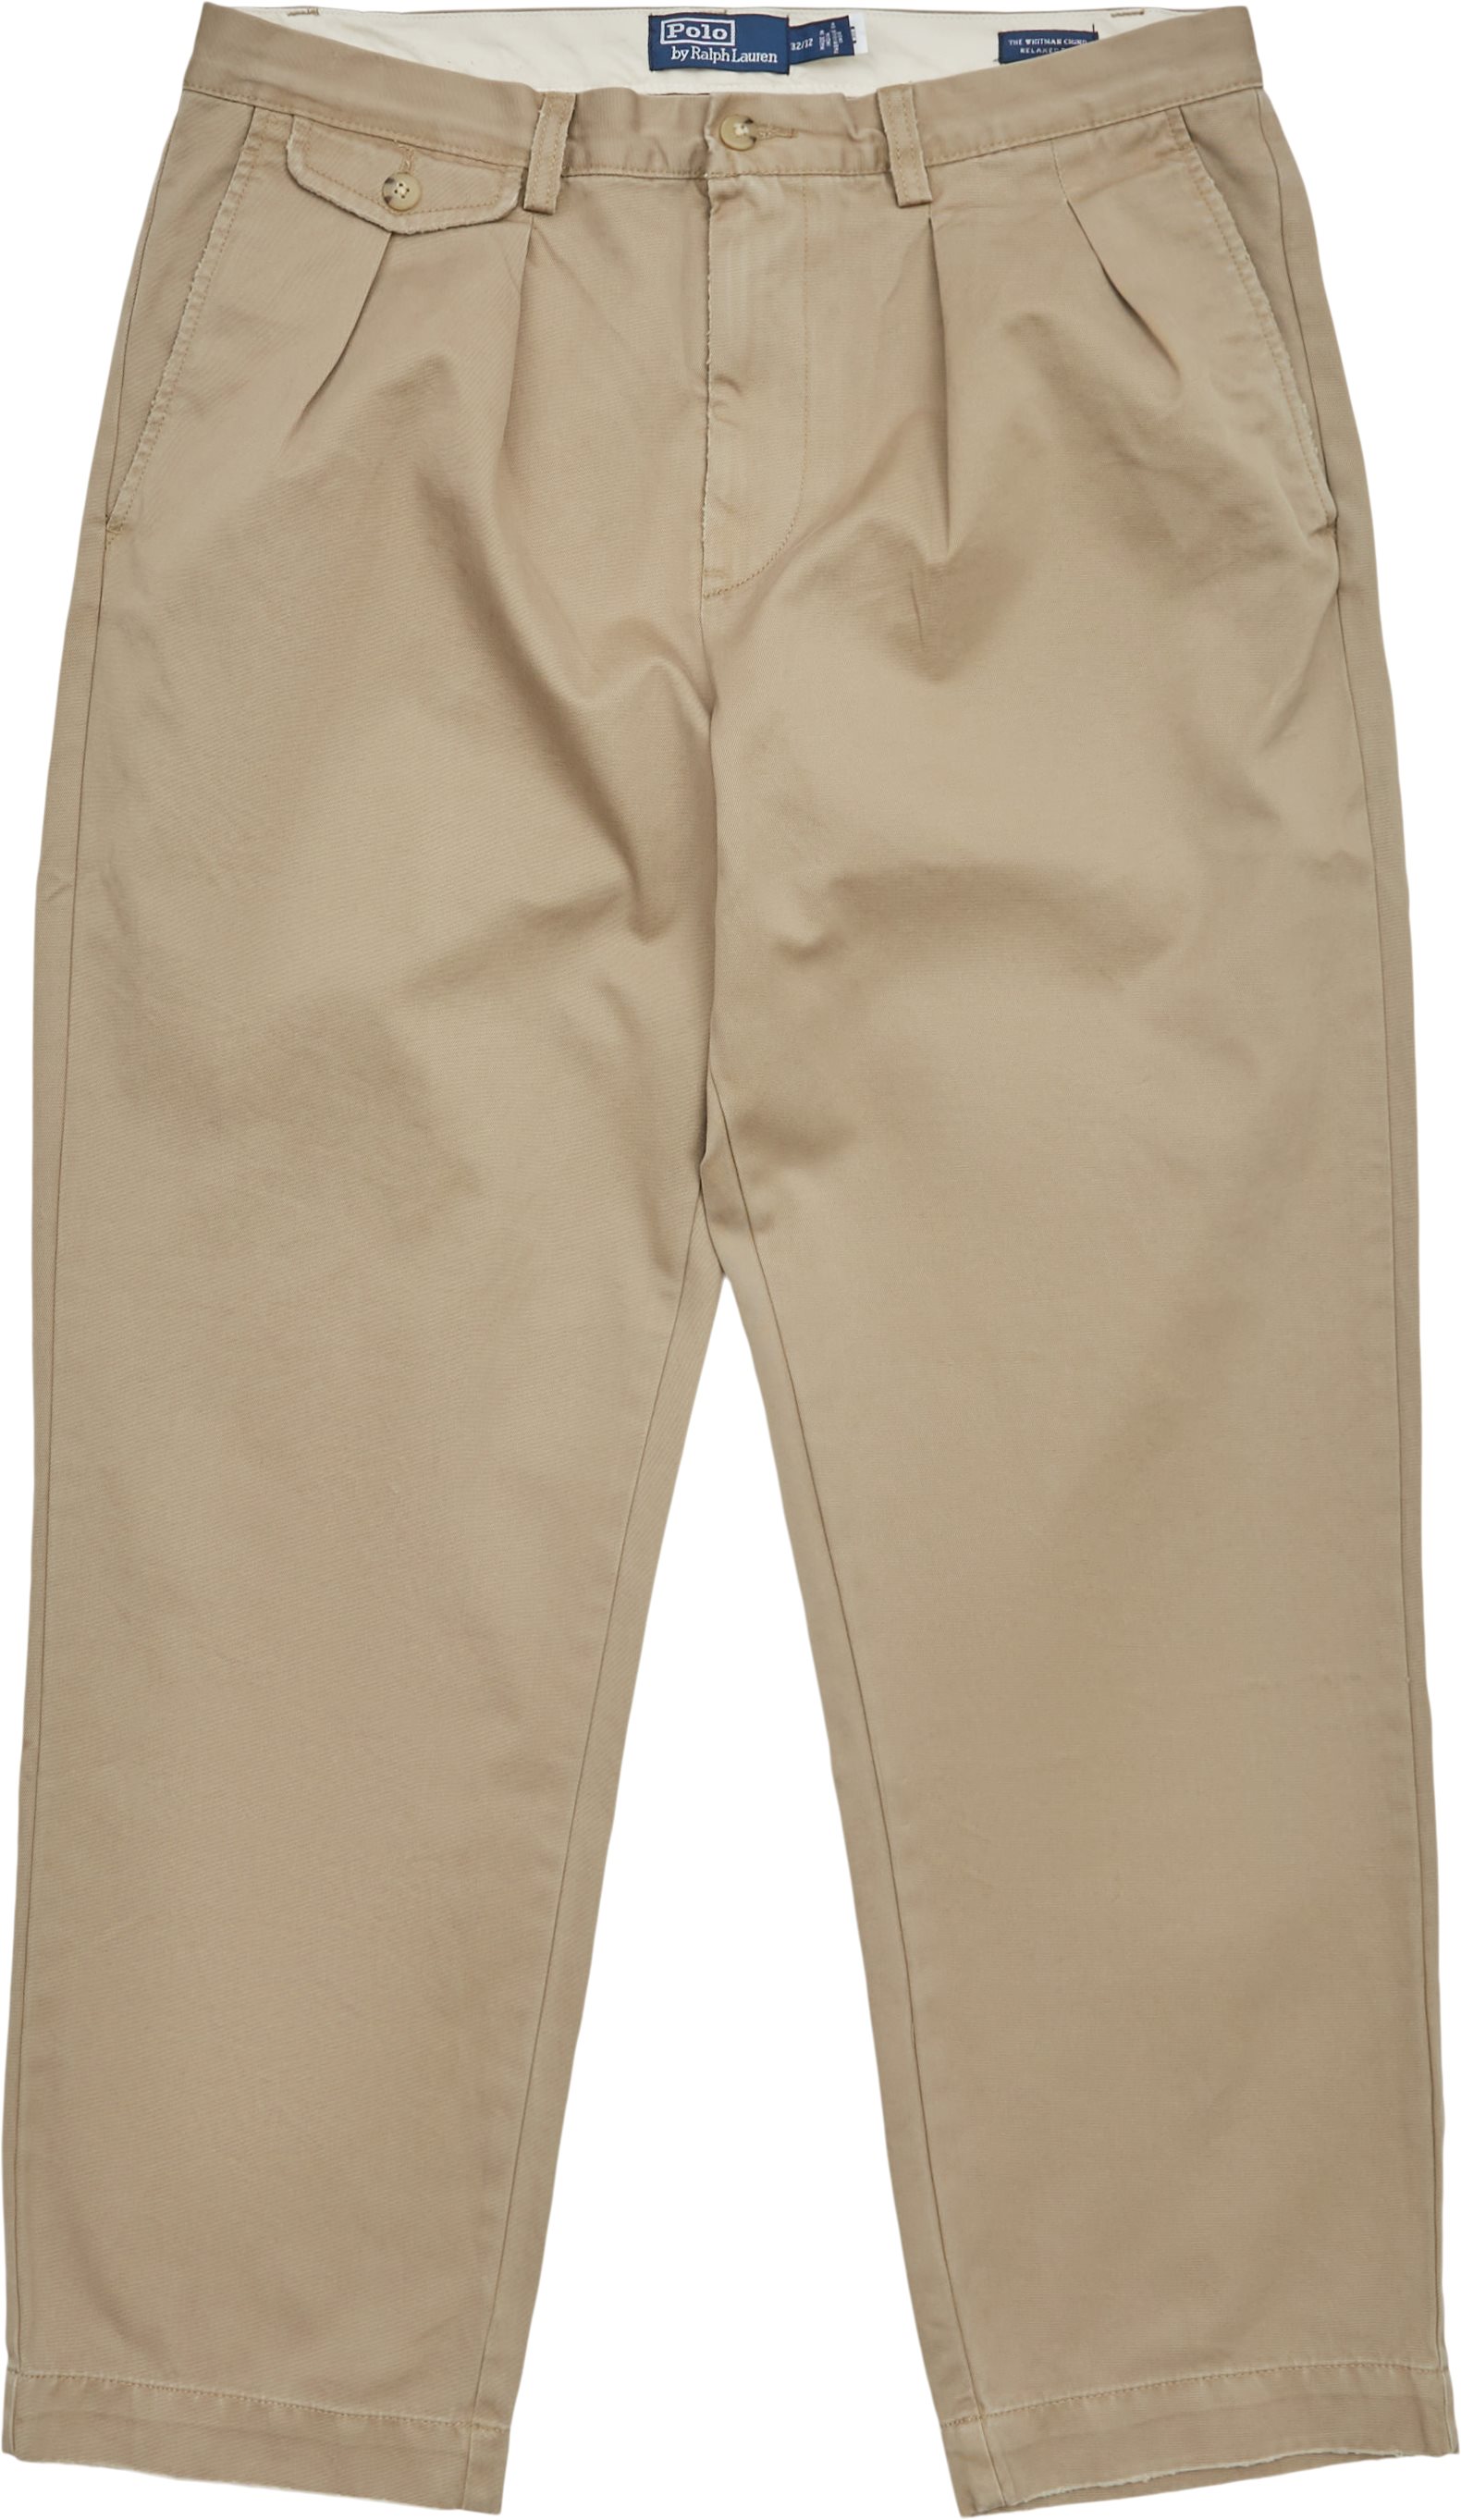 Trousers - Relaxed fit - Sand